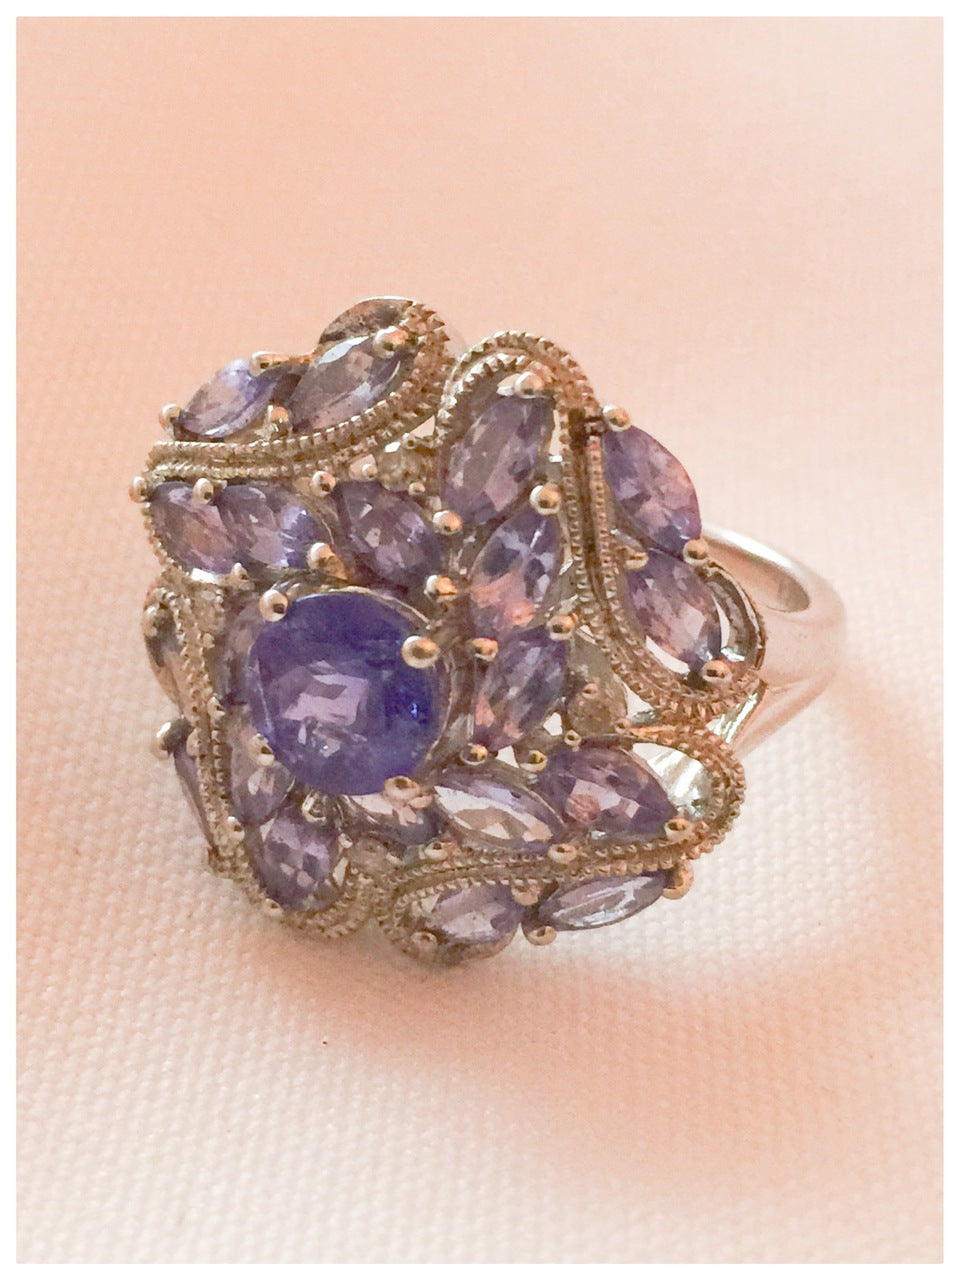 Vintage Sterling Silver Ring with Light Purple Stones Size 10